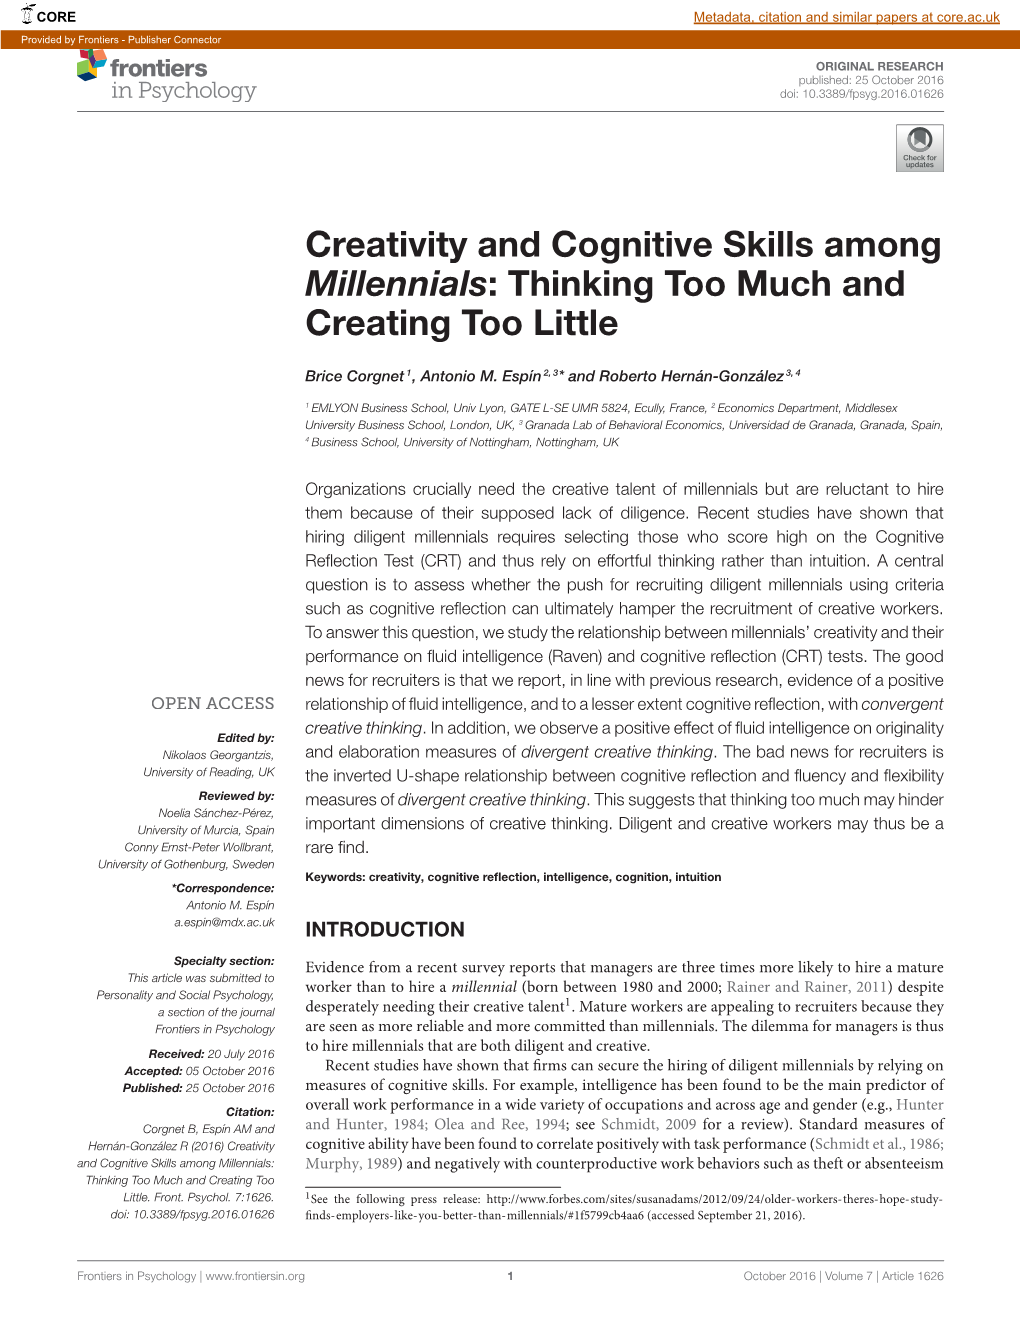 Creativity and Cognitive Skills Among Millennials: Thinking Too Much and Creating Too Little